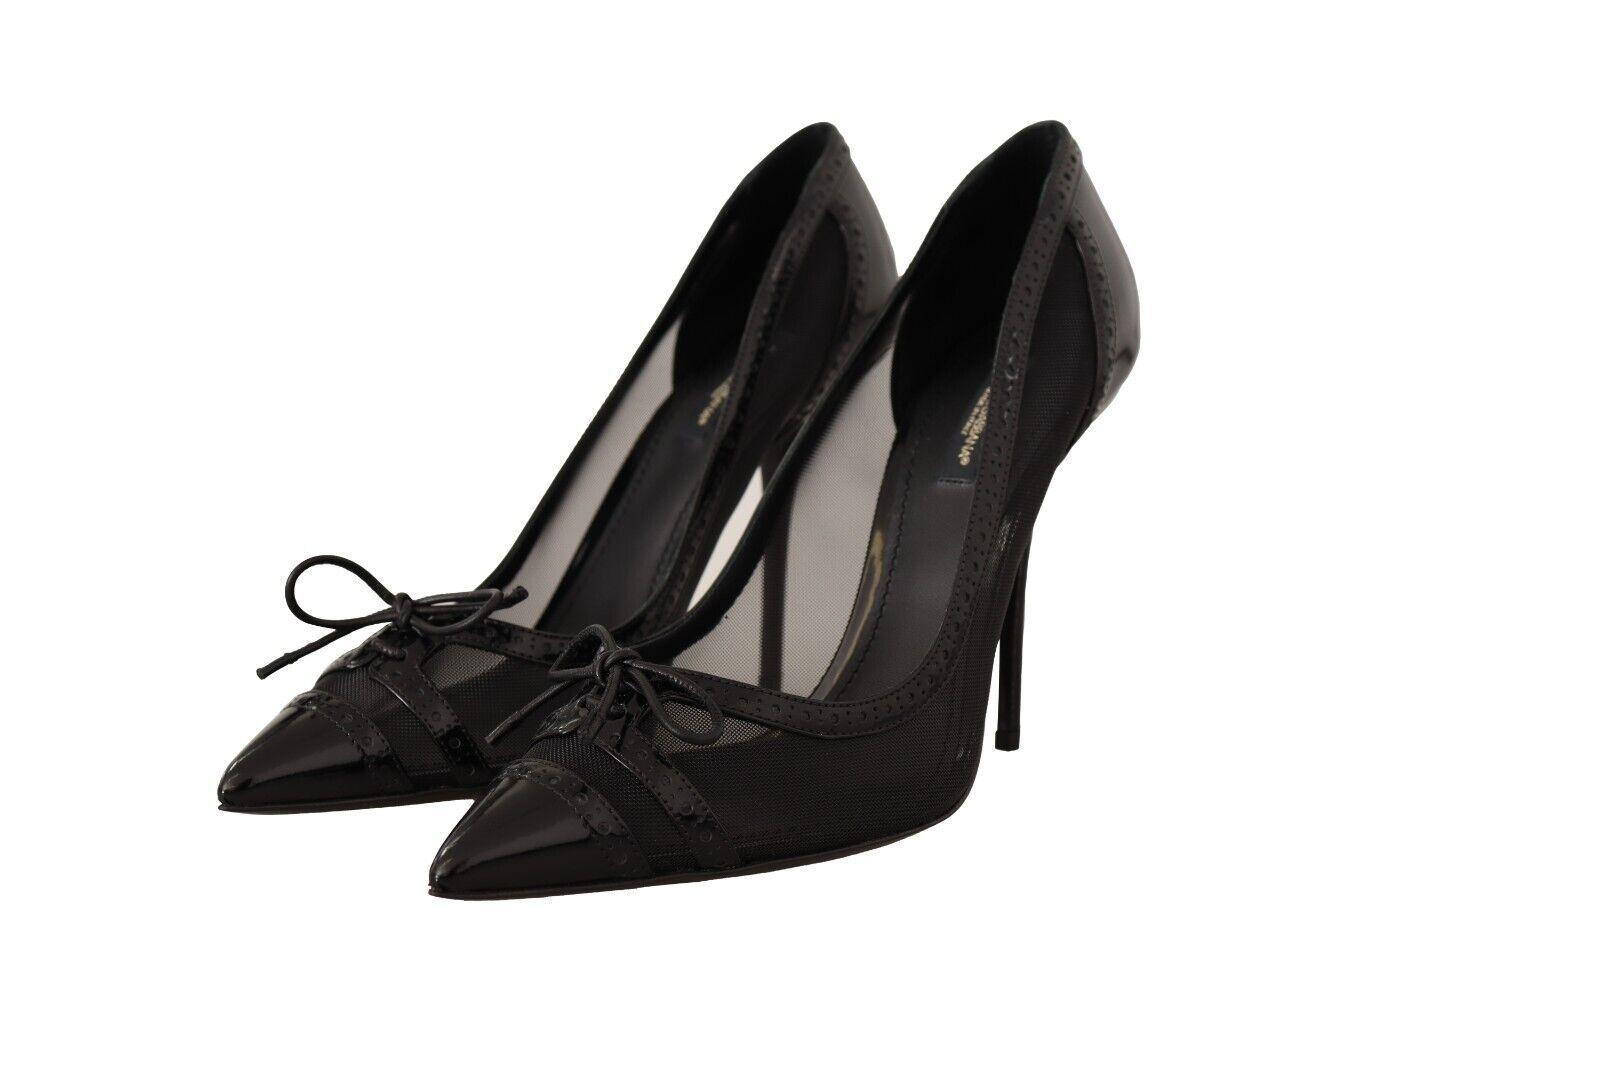 Dolce & Gabbana Black Mesh Leather Pointed Heels Pumps Shoes - Designed by Dolce & Gabbana Available to Buy at a Discounted Price on Moon Behind The Hill Online Designer Discount Store